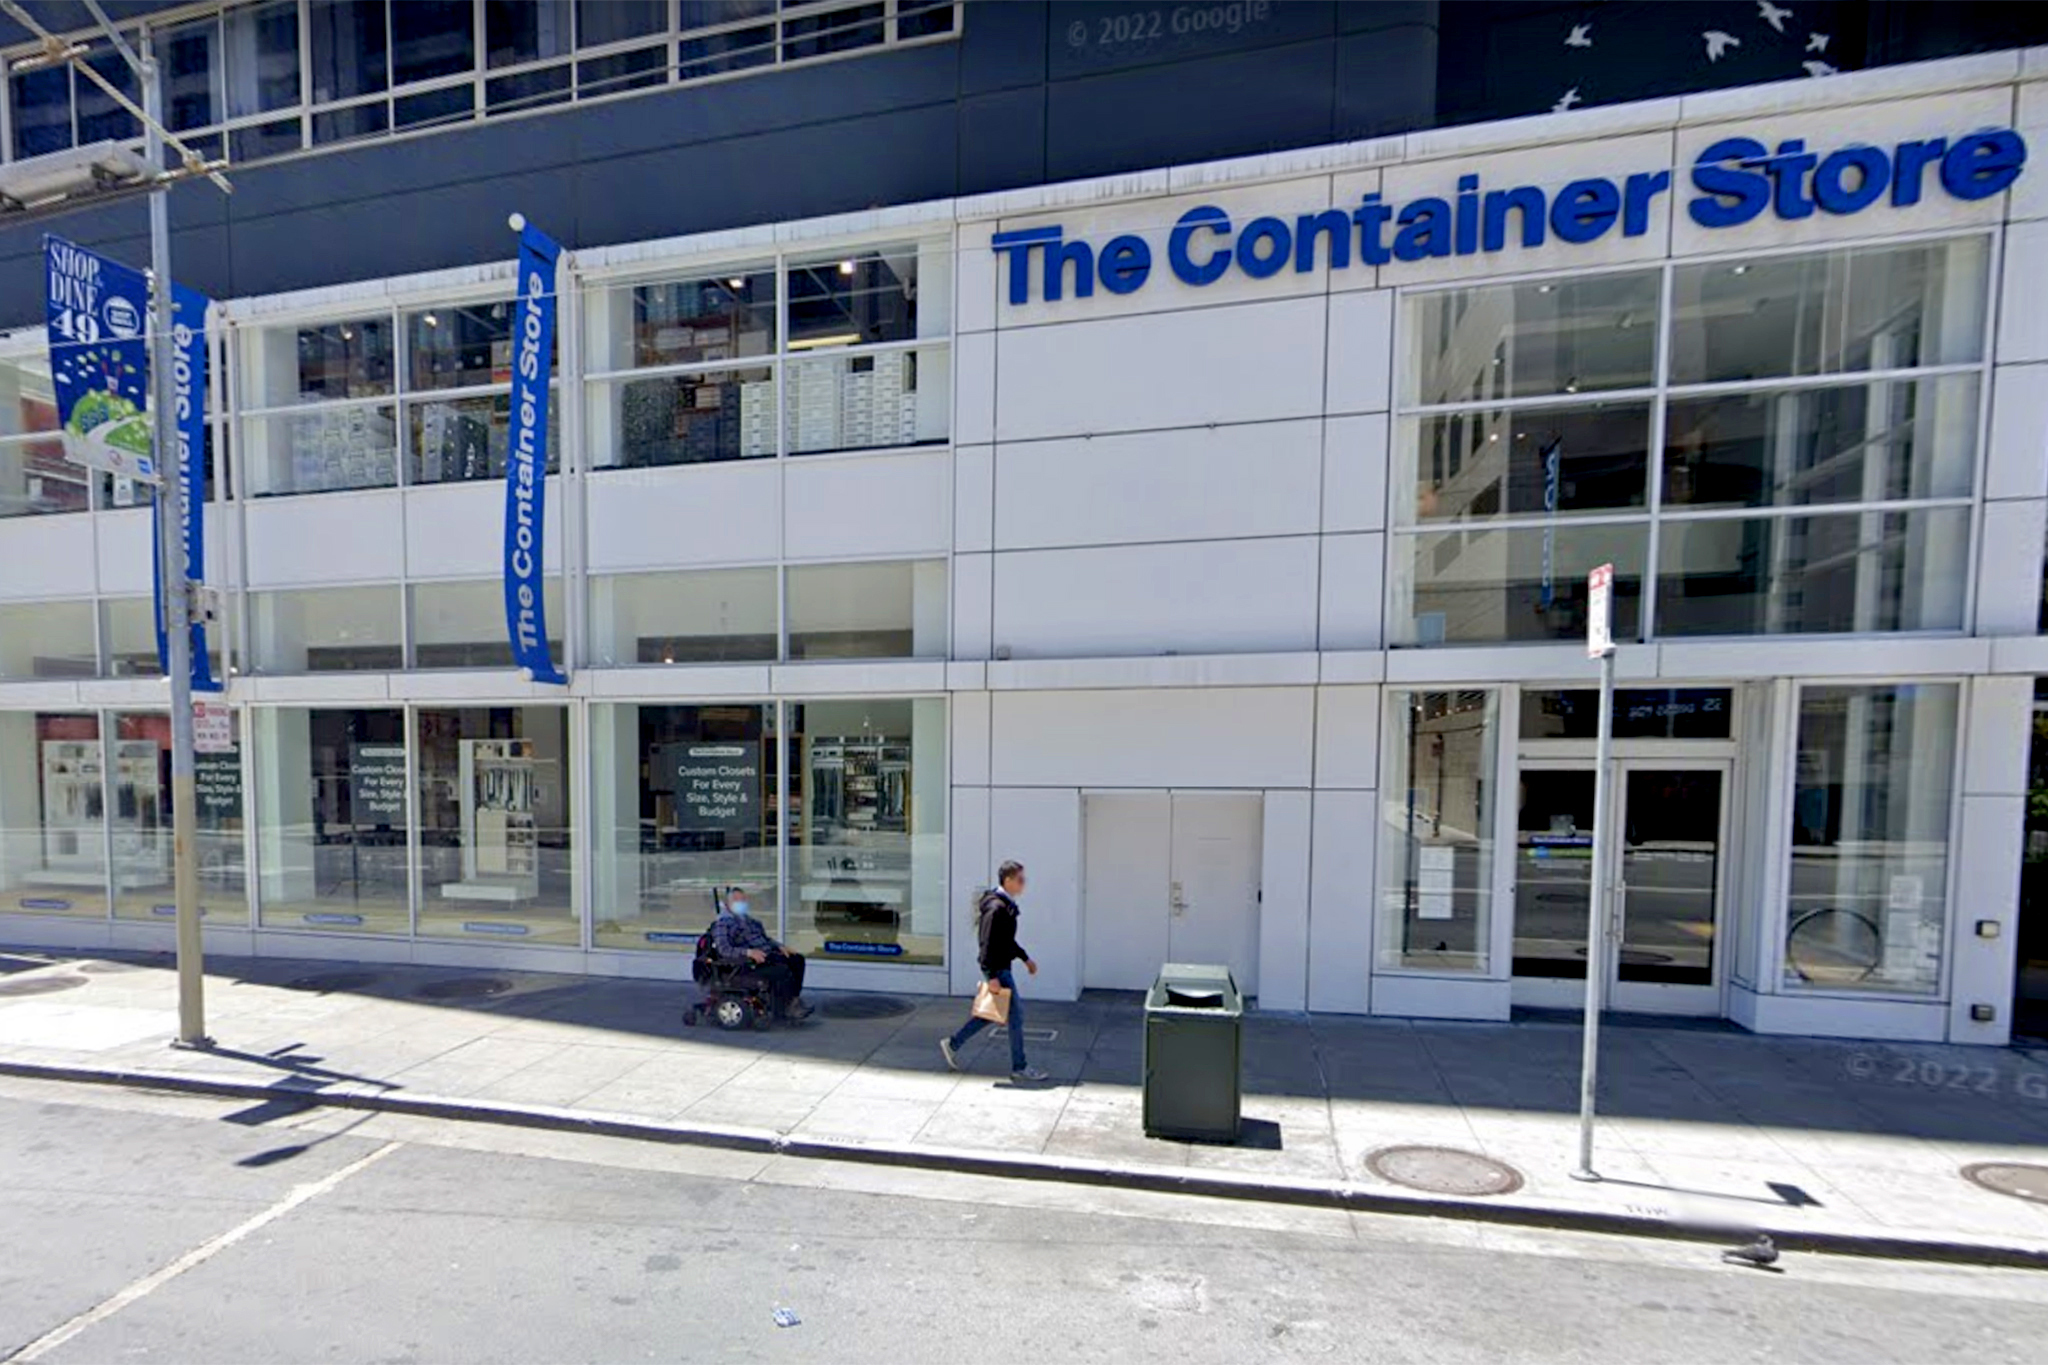 The Container Store near Union Square plans to close, relocate to SoMa